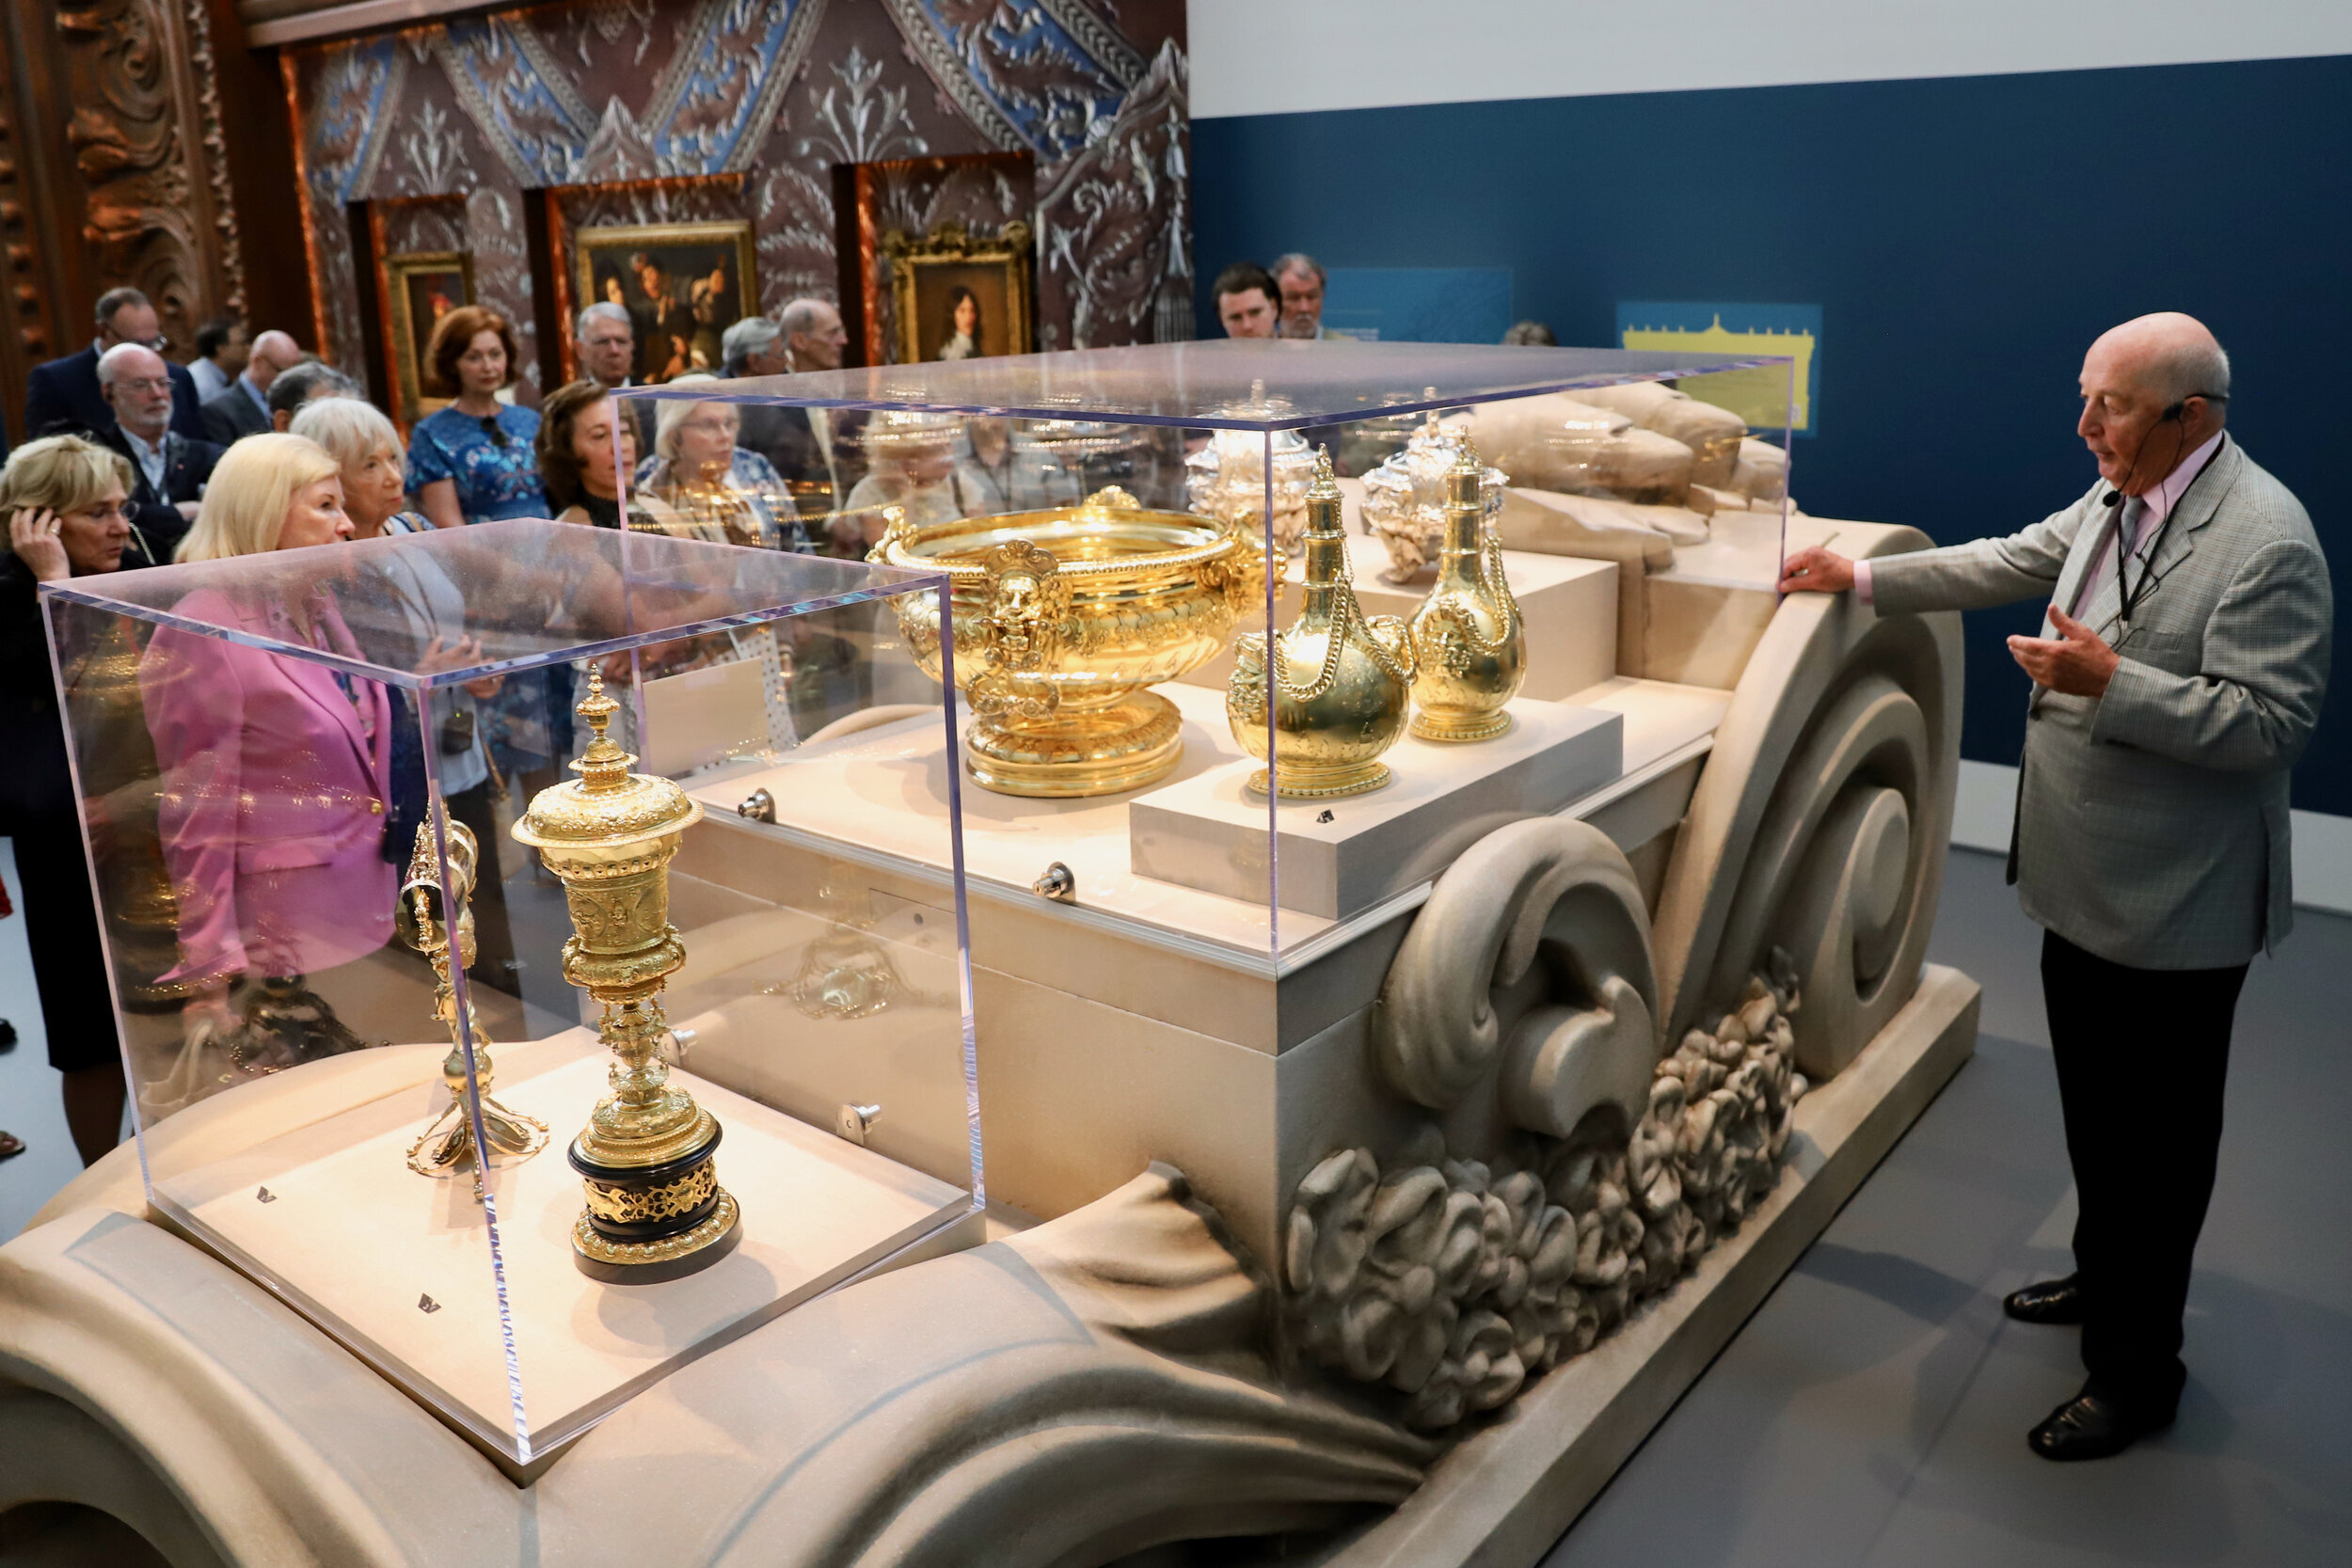  Sotheby’s welcomed St. George's Society for a special tour of the Treasures of Chatsworth Exhibition, given by none other than the Duke of Devonshire himself. 